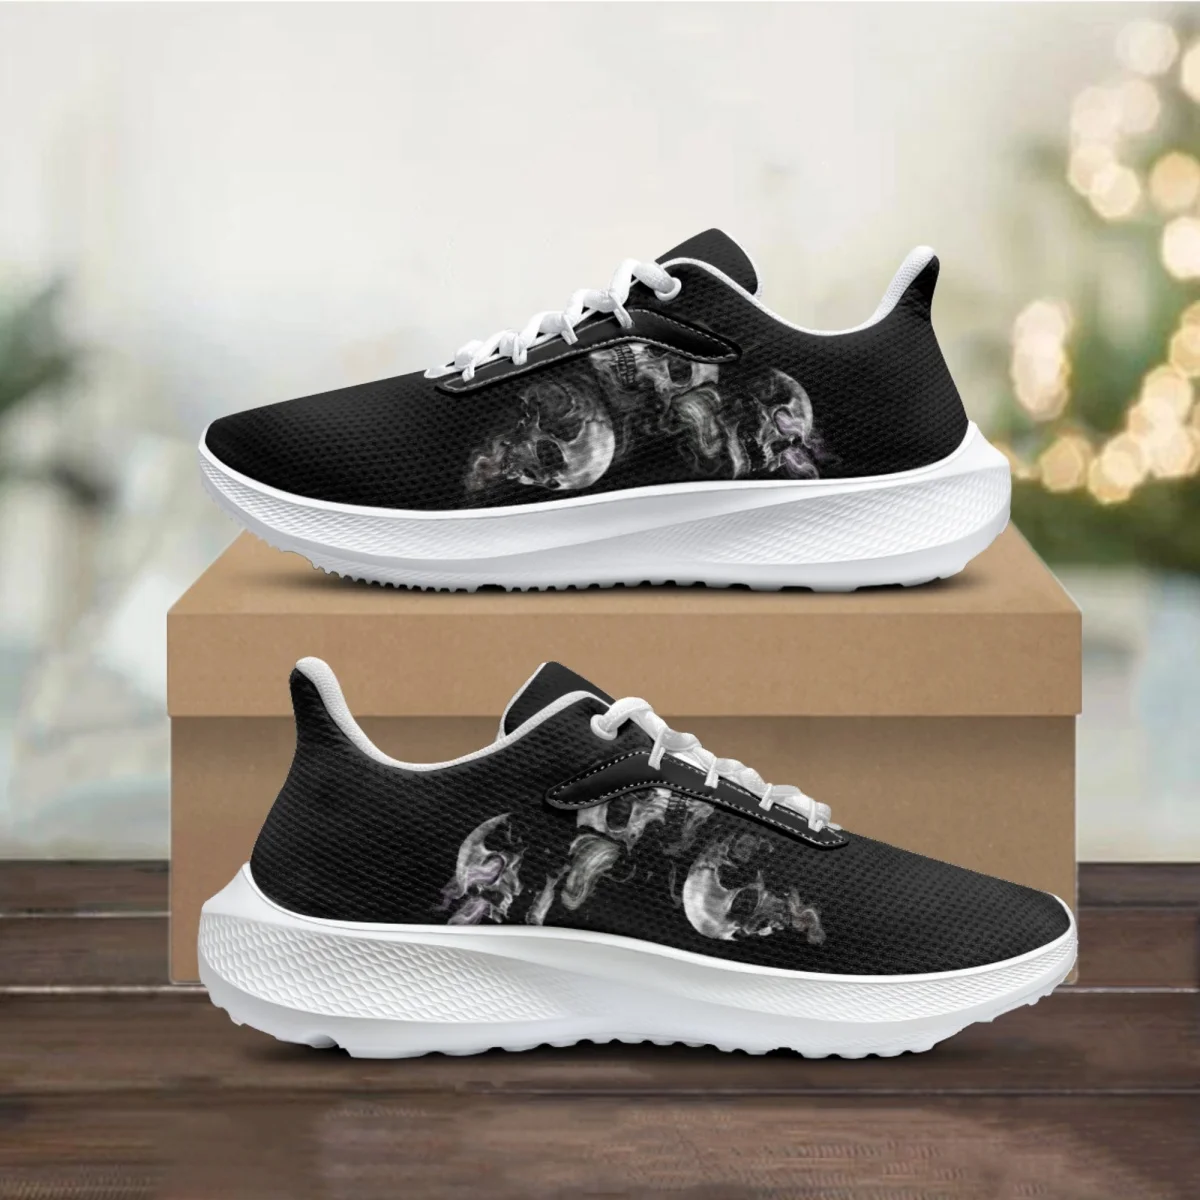 

Skull Black White Shoes Casual Summer Women Sneakers Damping Wear-resistant Lacing Footwear Comfortable Sport Vulcanized Shoes